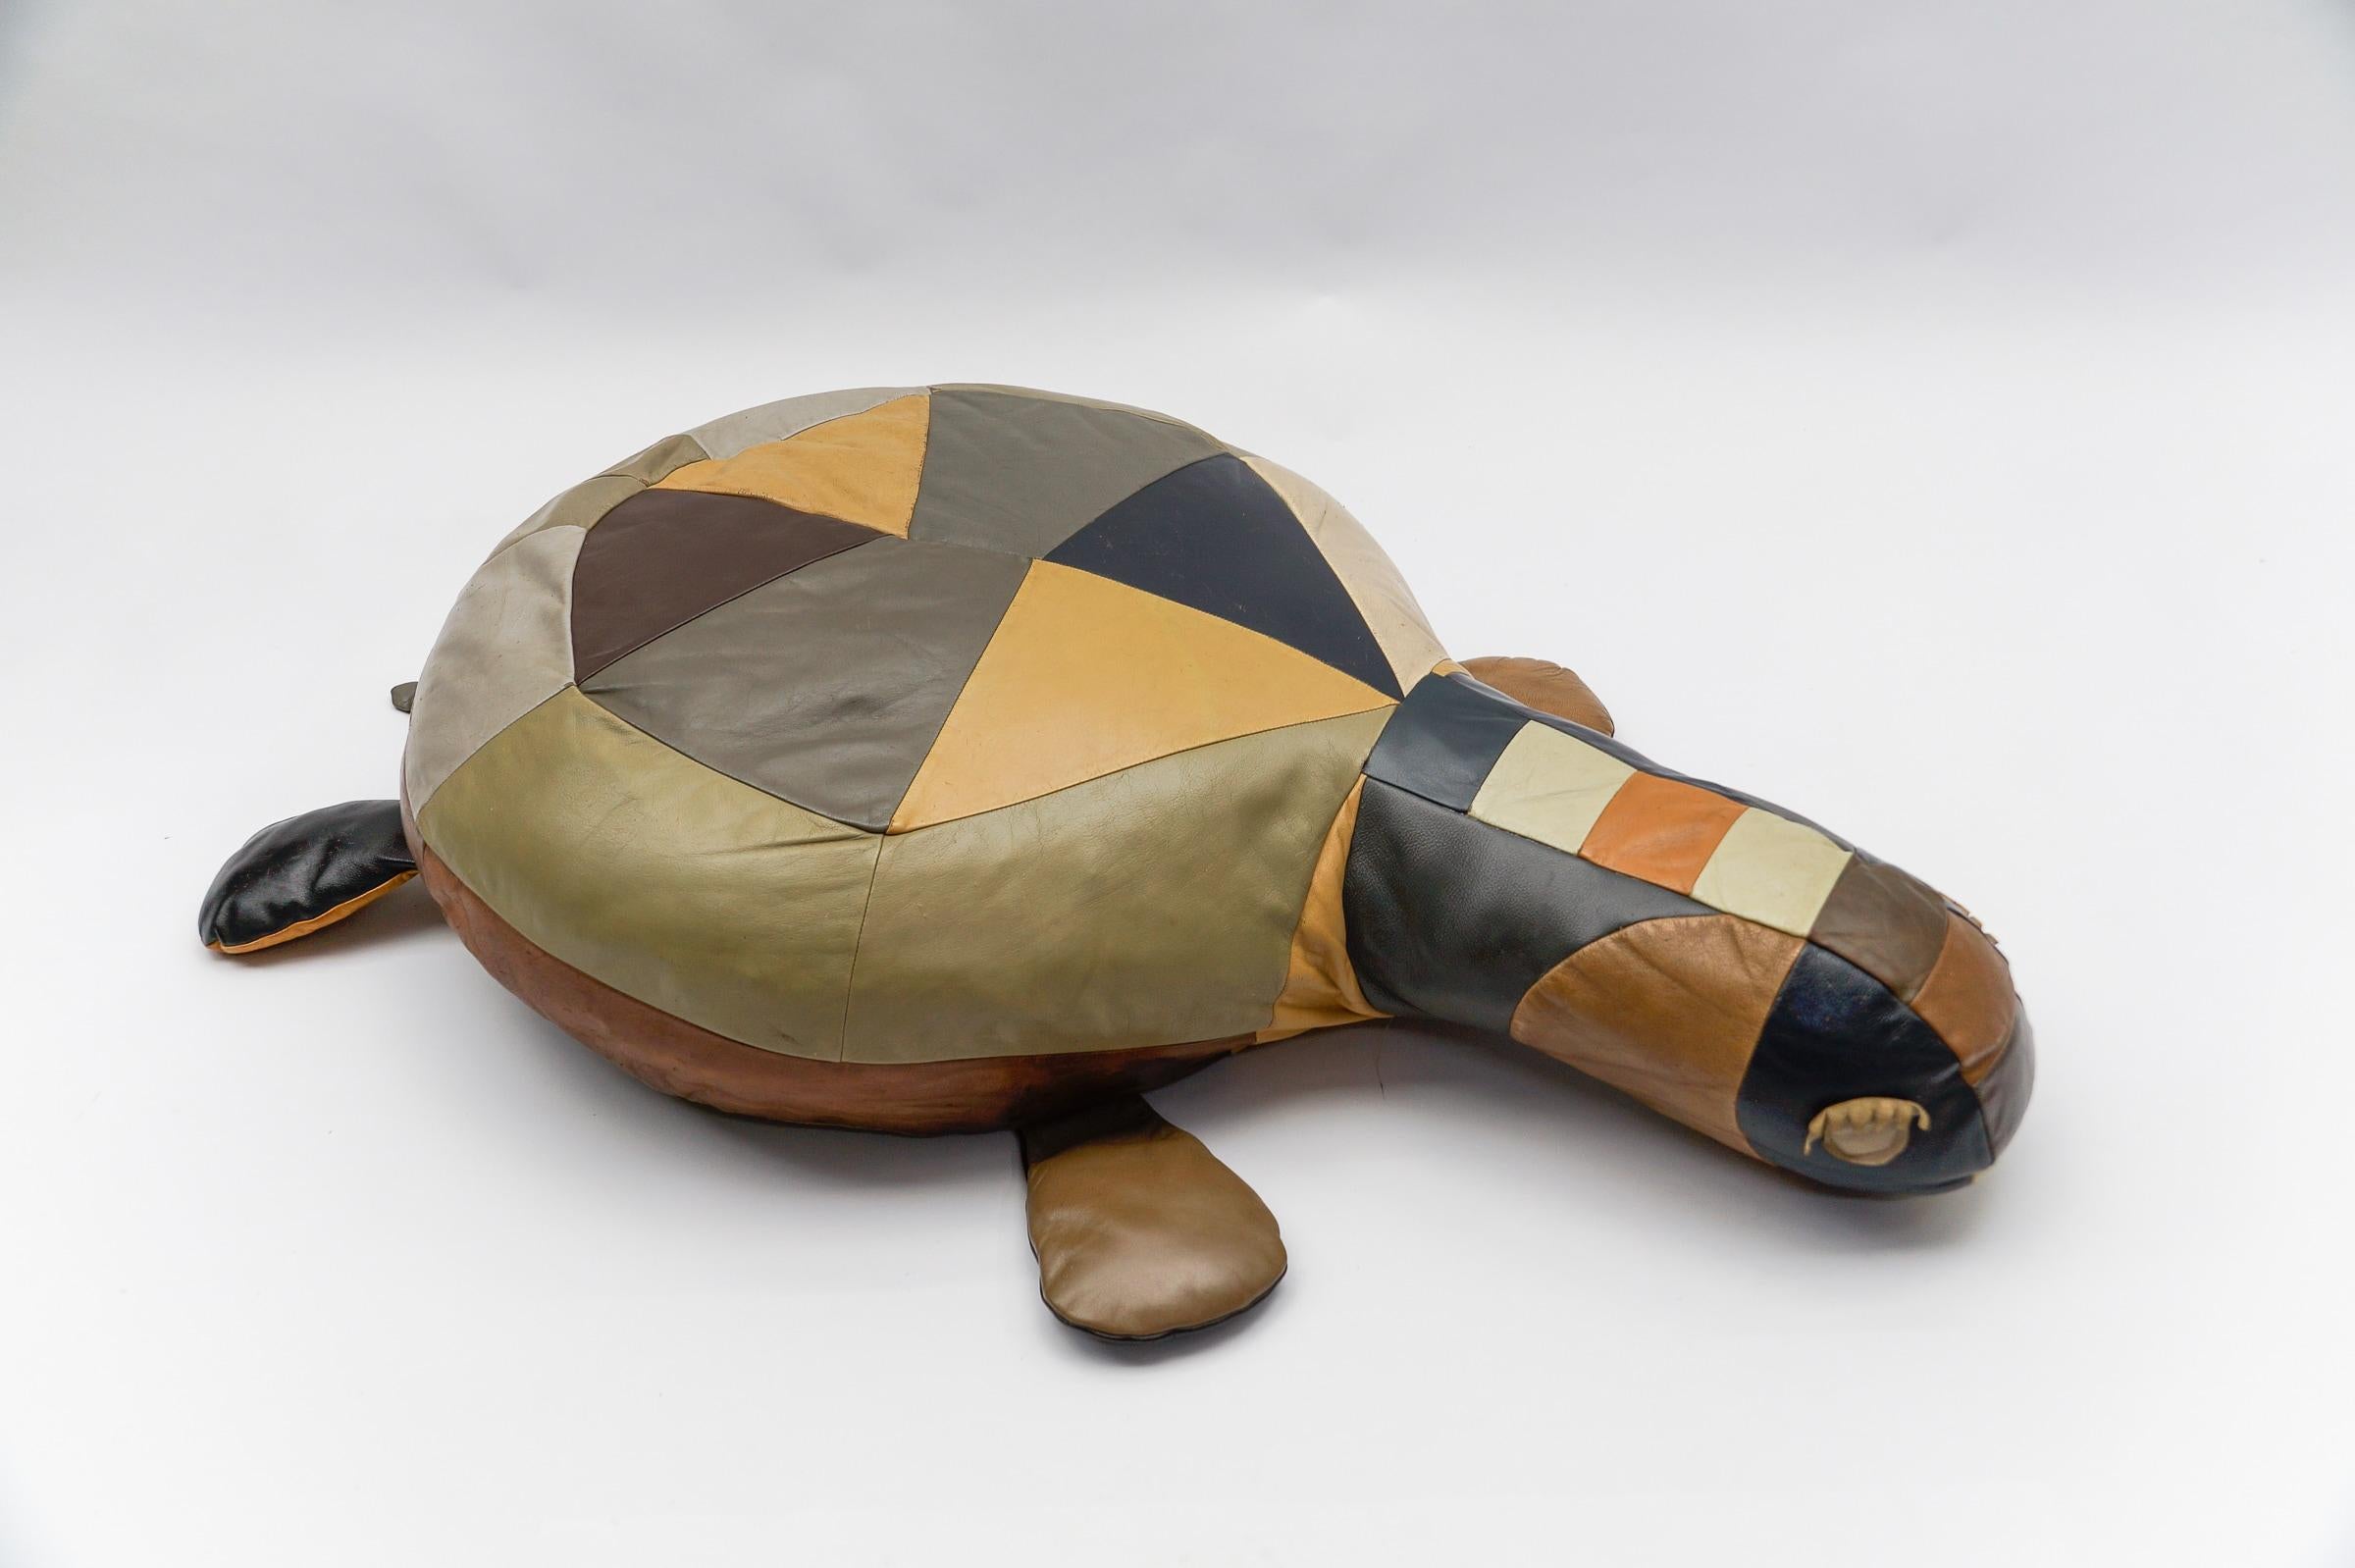 Swiss Set of 3 Leather Patchwork Turtle Poufs - Mid-Century Modern, Switzerland, 1960s For Sale